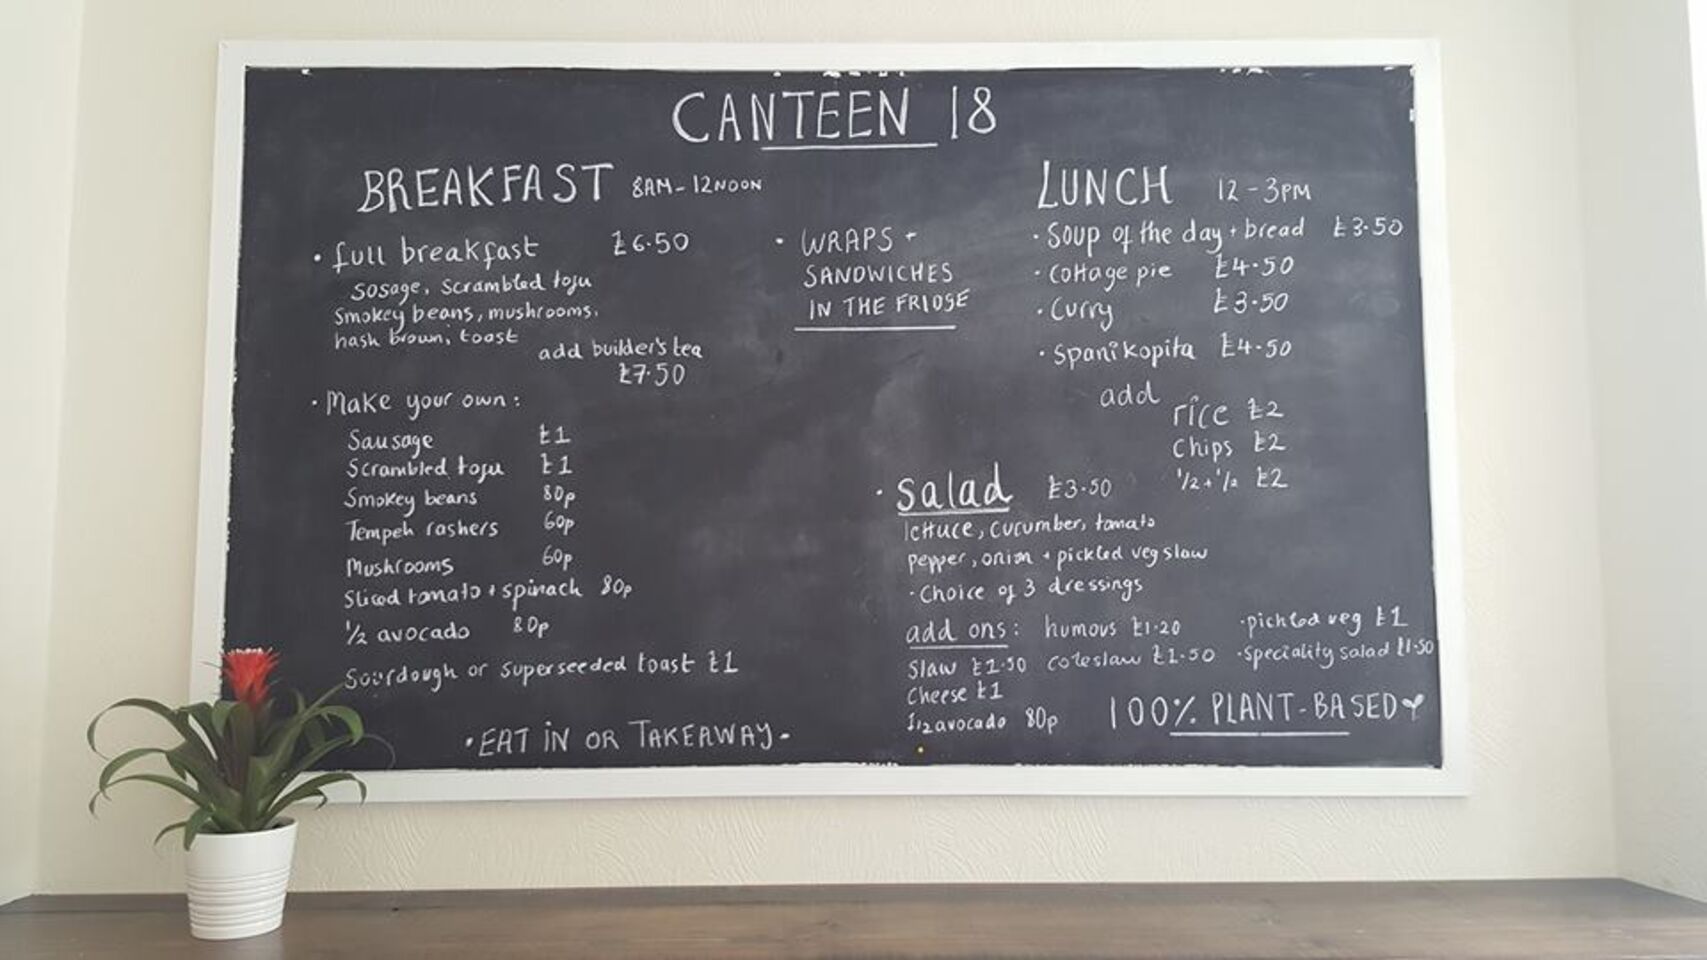 A photo of Canteen 18